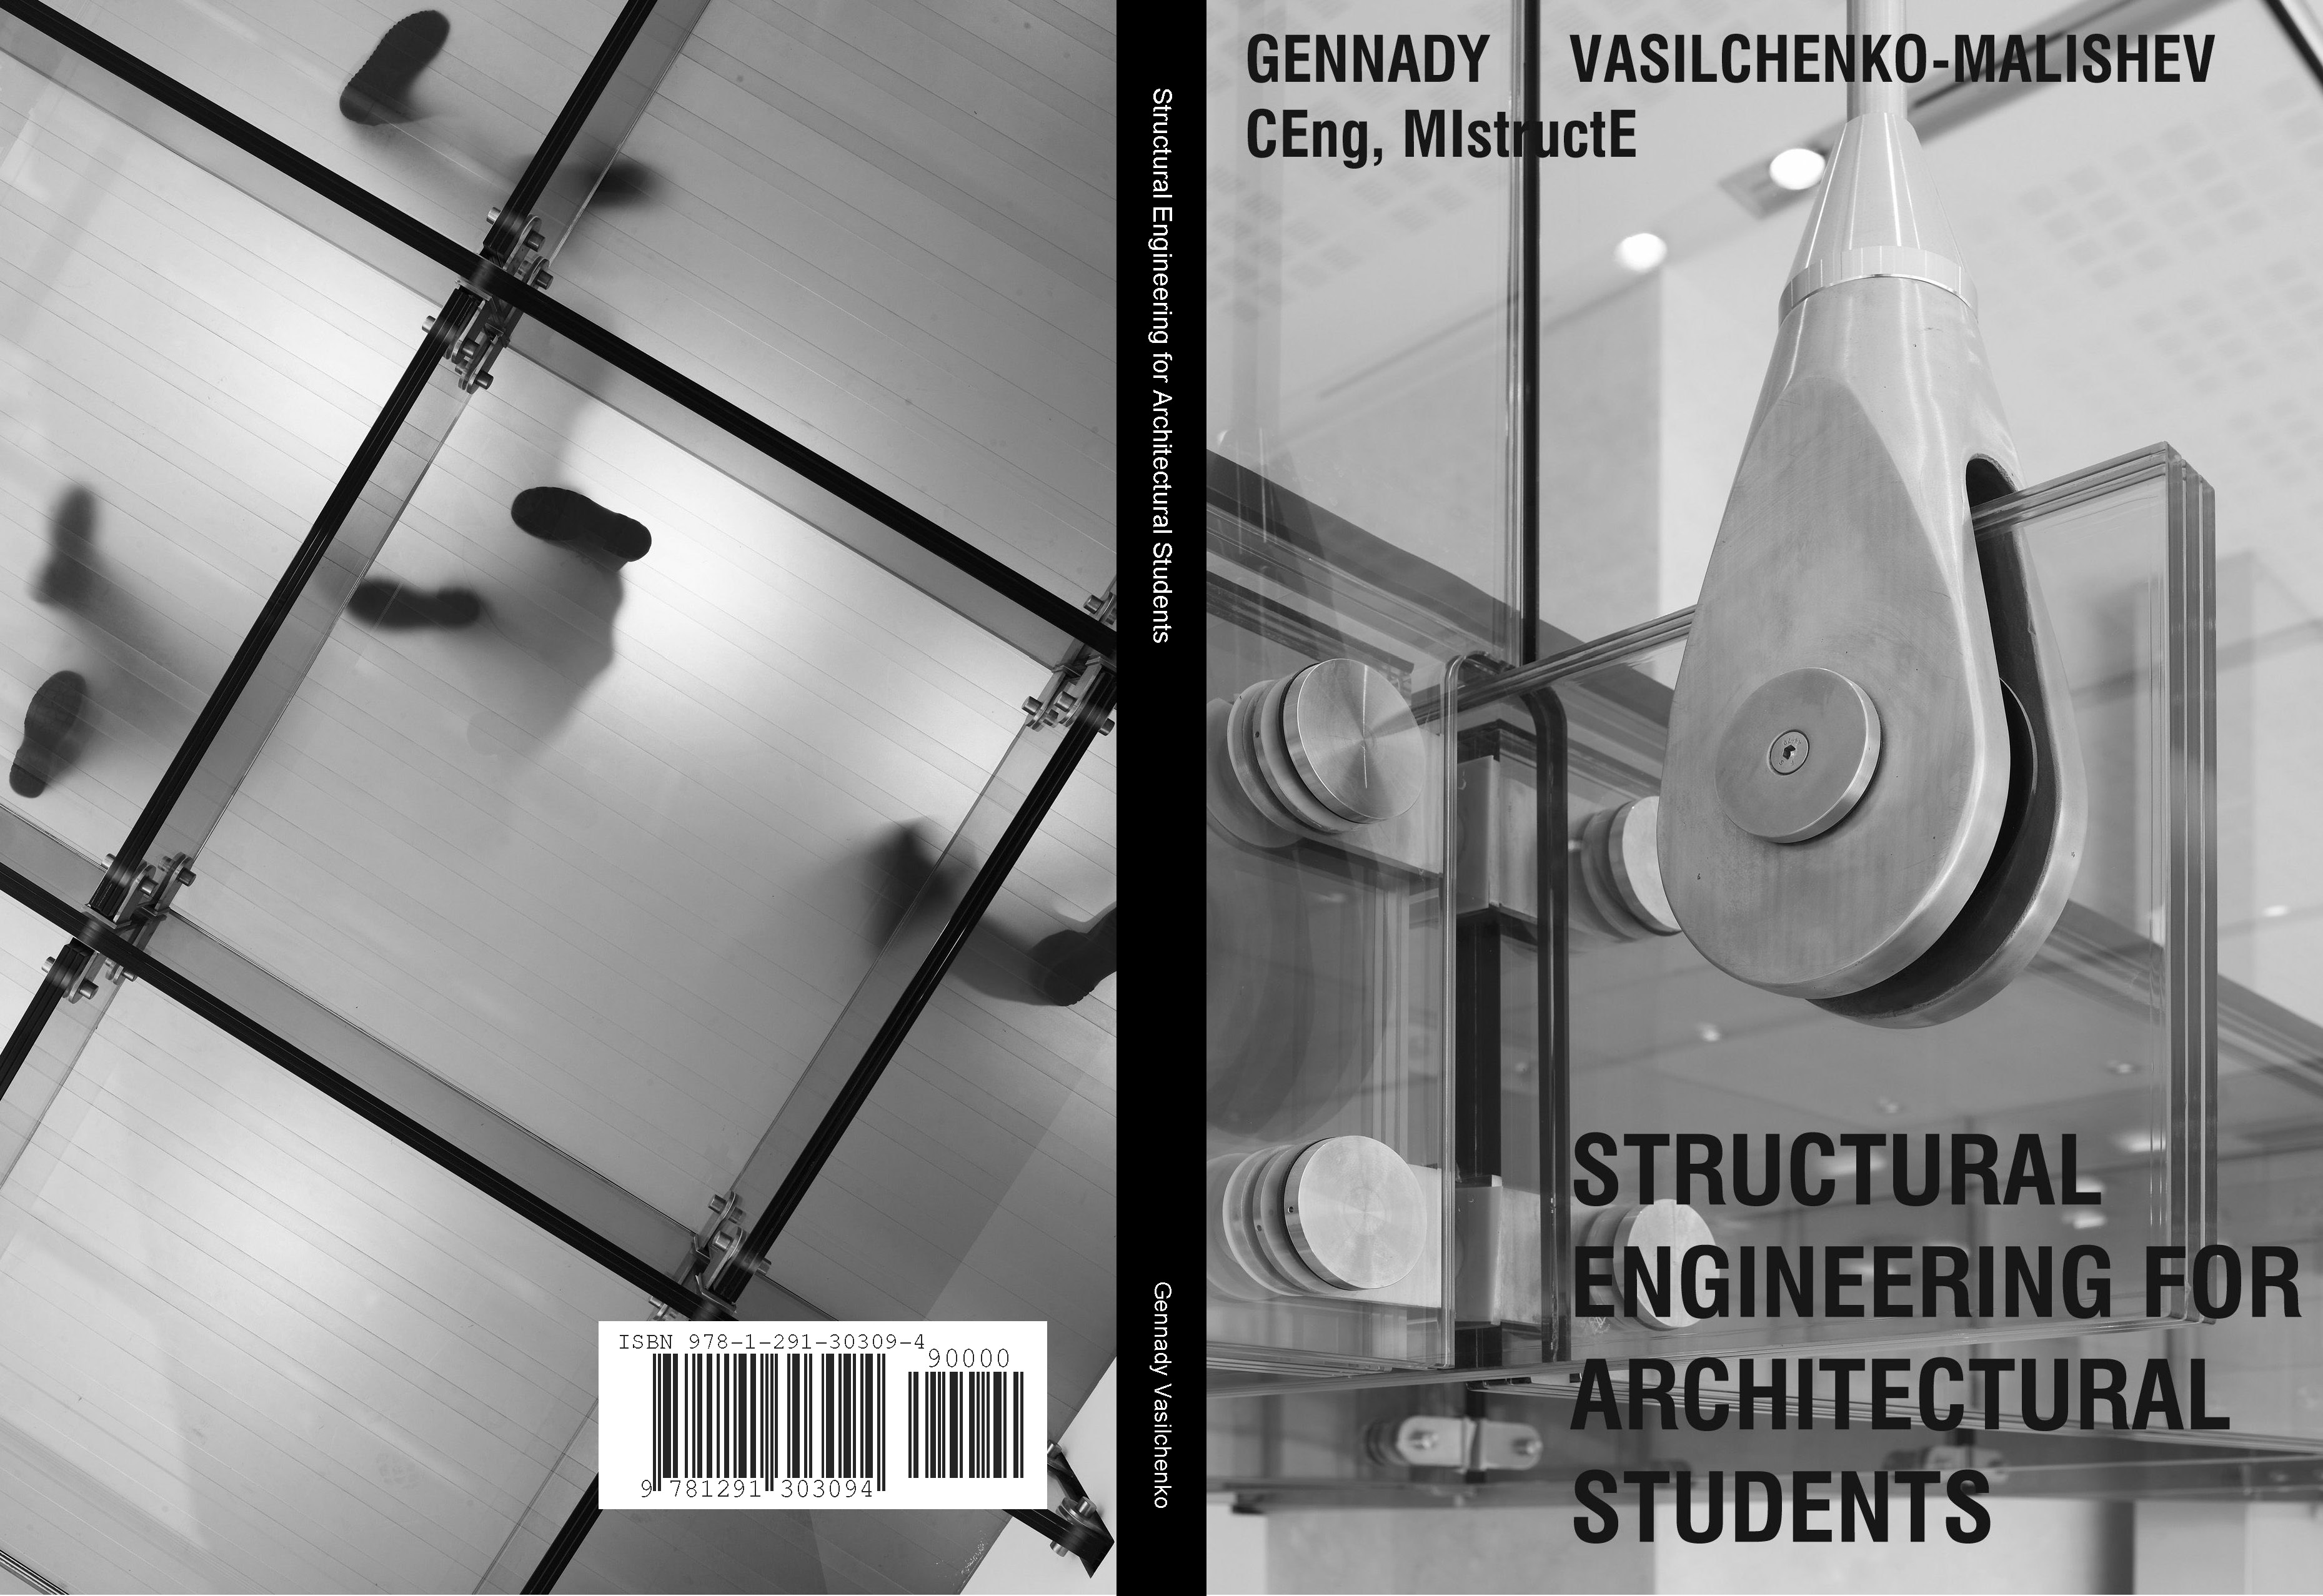 Structural　Gennady　Students,　Architectural　for　Engineering　Malishev